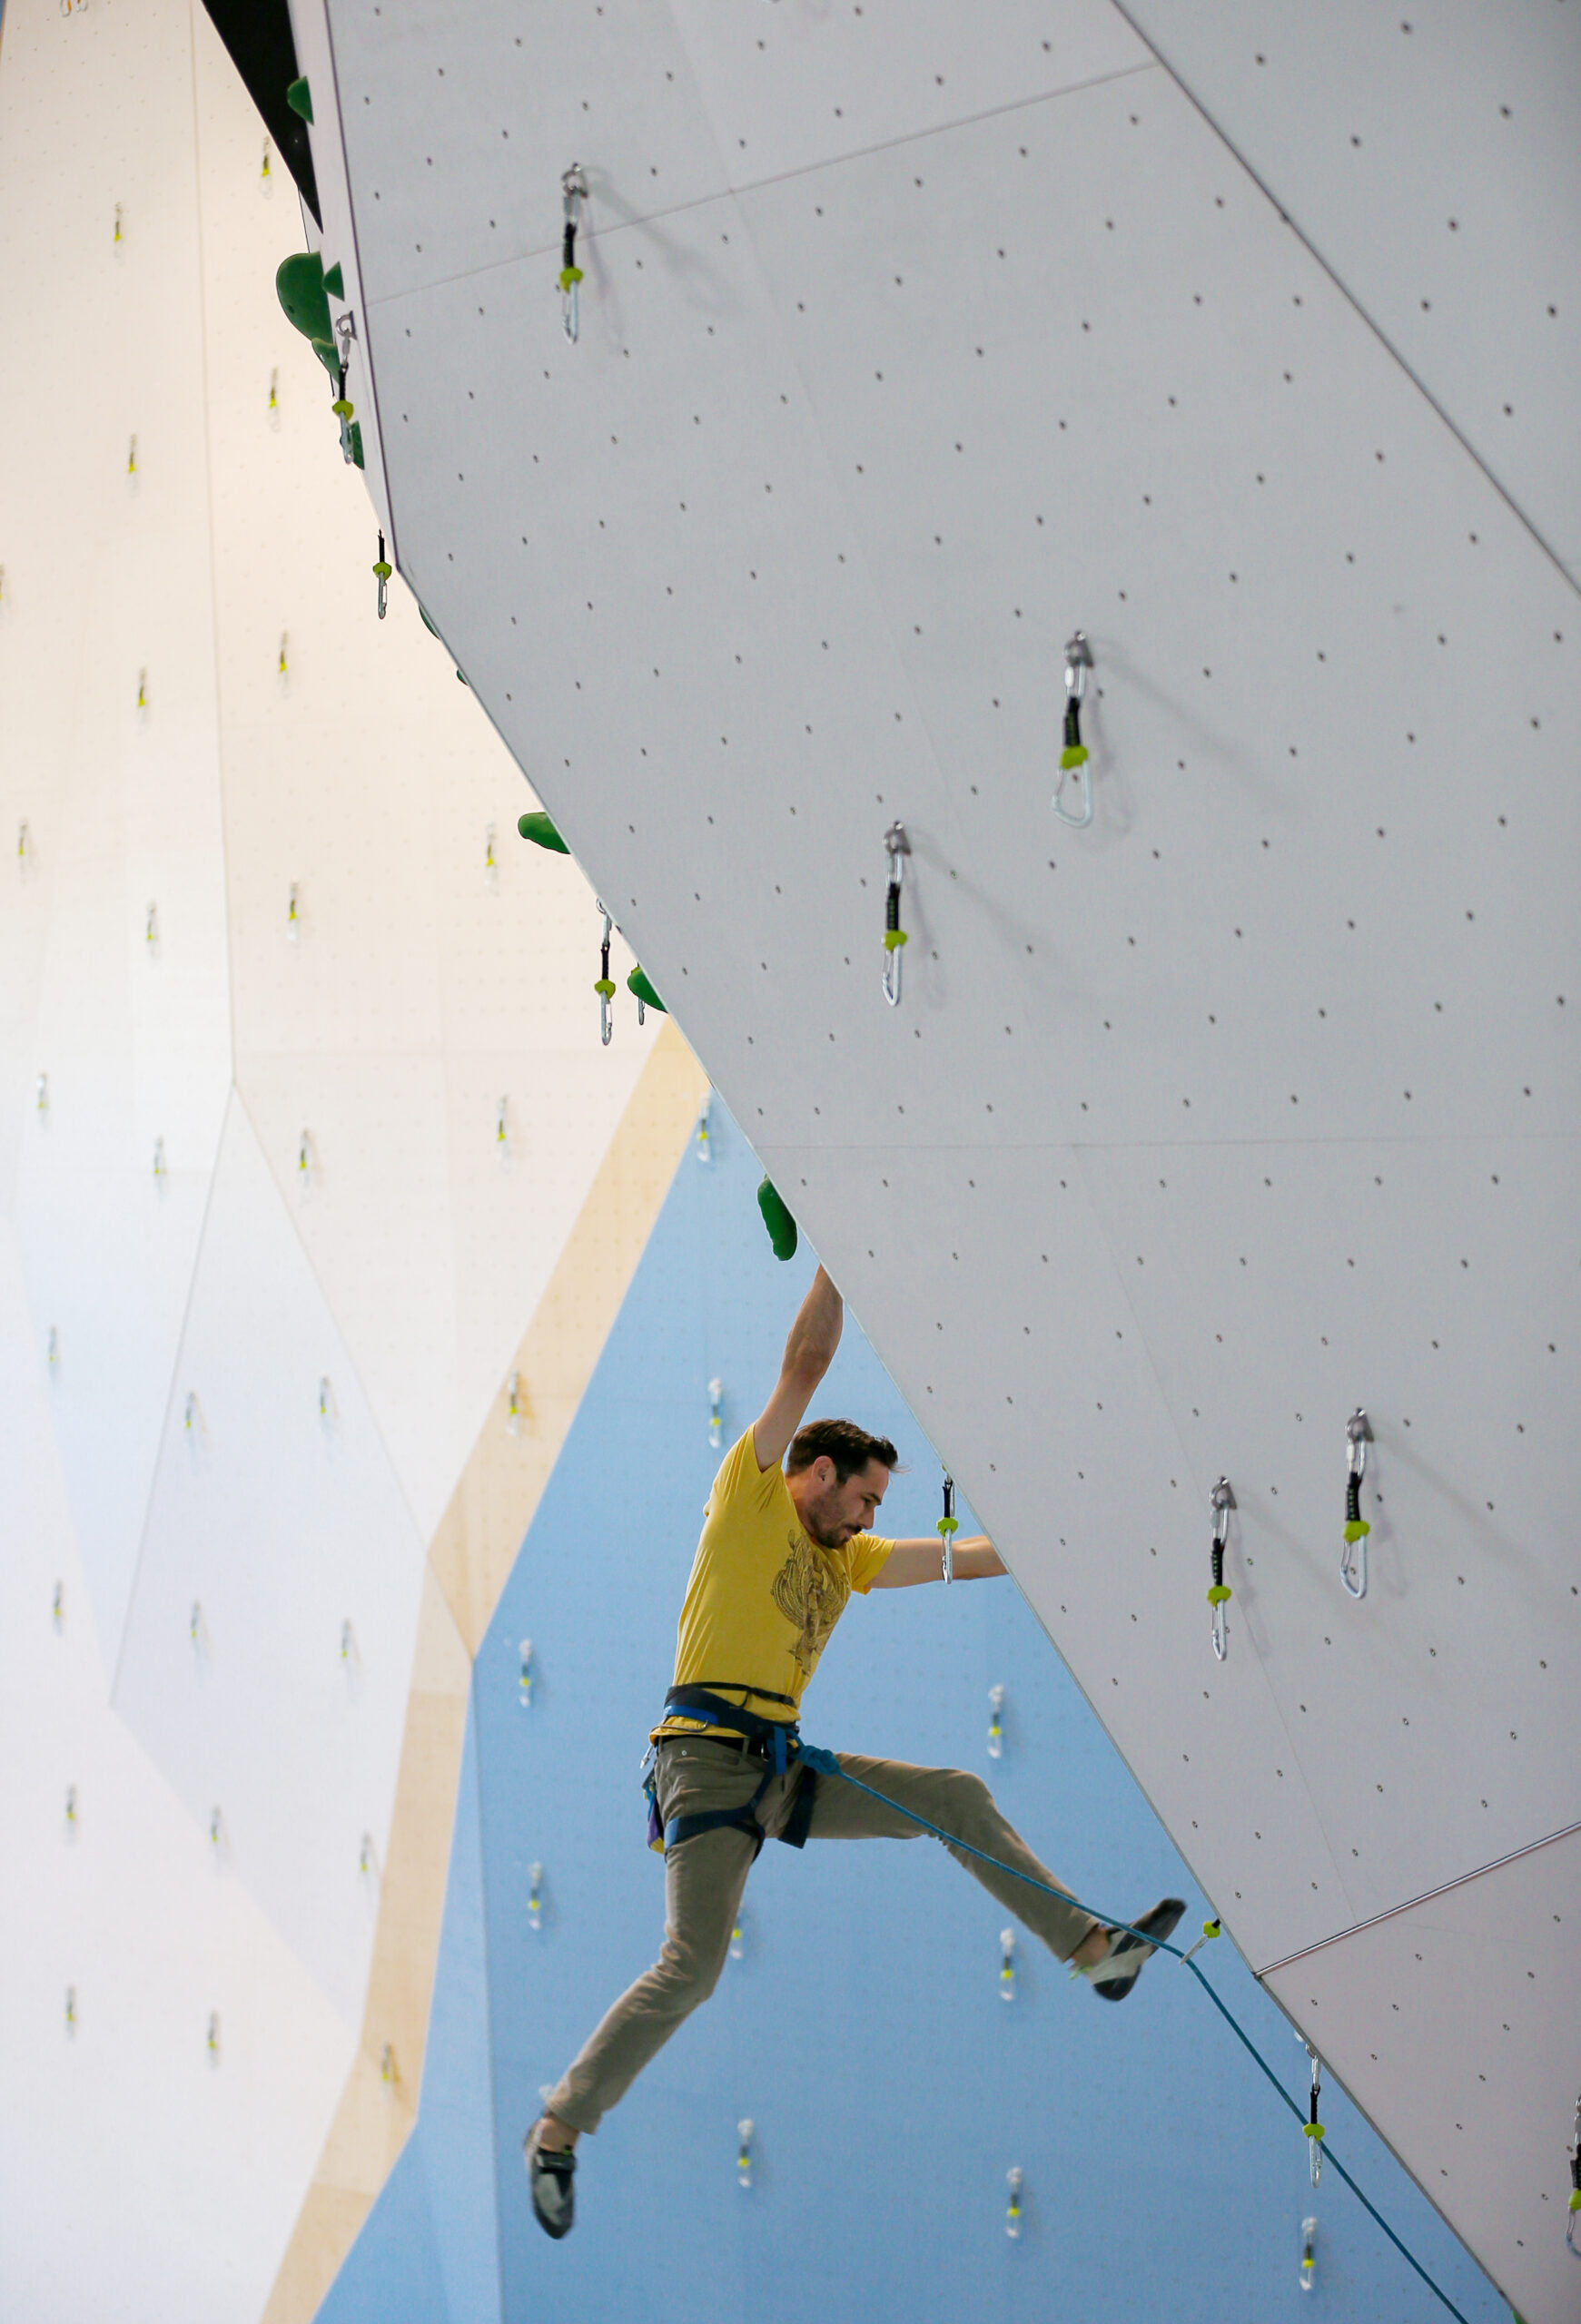 Kevin Jorgeson makes his way up a newly installed route at Session Climbing in Santa Rosa on Thursday, January 27, 2022. (Christopher Chung/The Press Democrat)